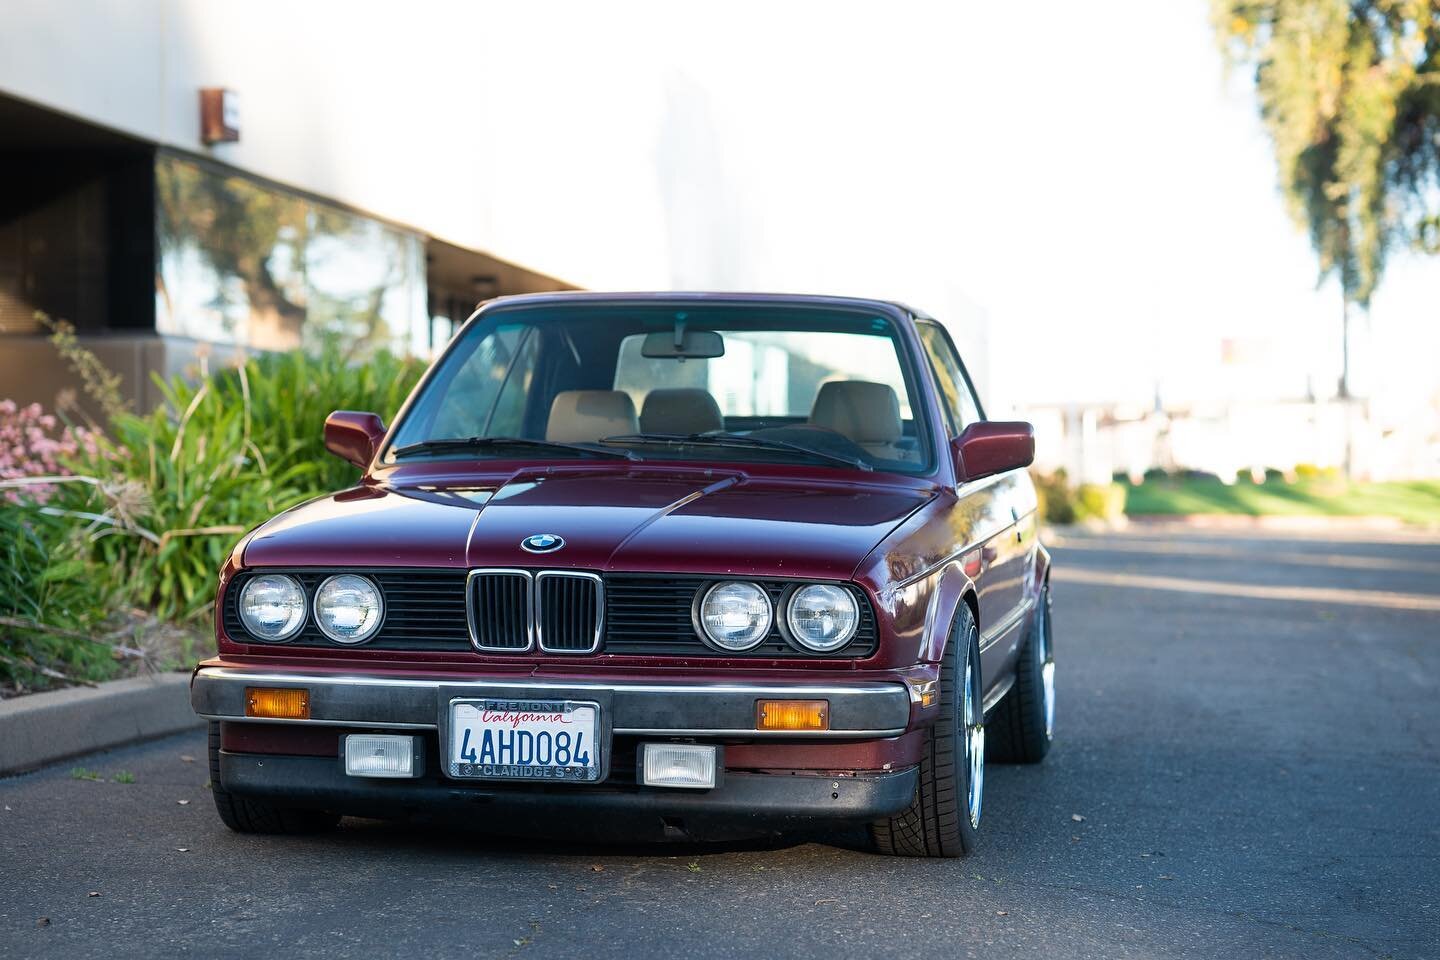 CAtuned.com 🌴 #catuned
@essexsalcido_e1 came in for some upgrades. #catunedcoilovers new poly bushings, wheels, and round of maintenance. Great weekend cruiser in the making. #bmw #bmwclassic #ultimateklasse

Purchase online / worldwide:
In CAnada: 